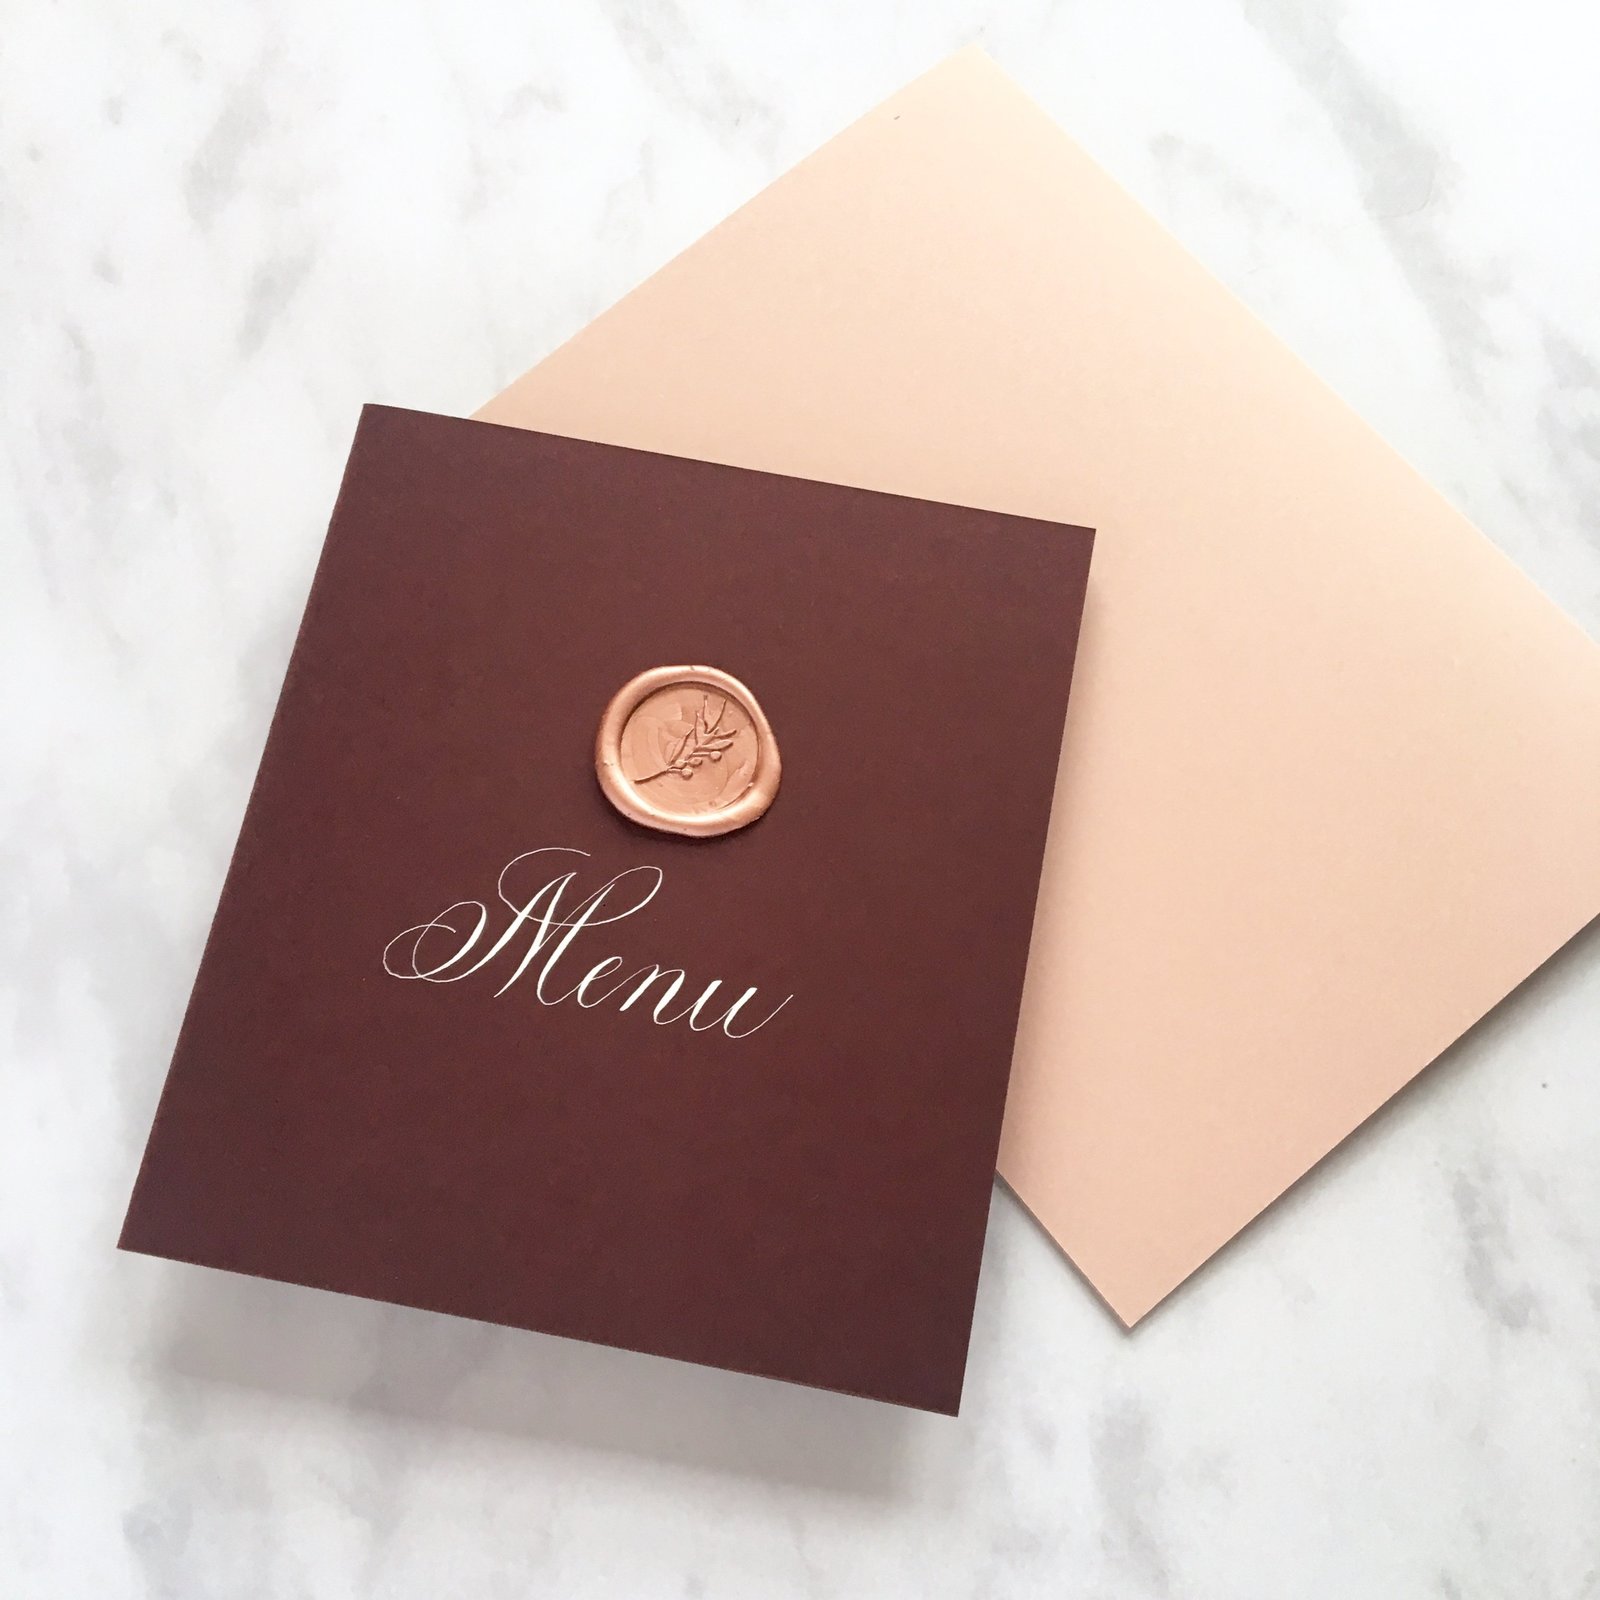 Menu booklets with white calligraphy and wax seal